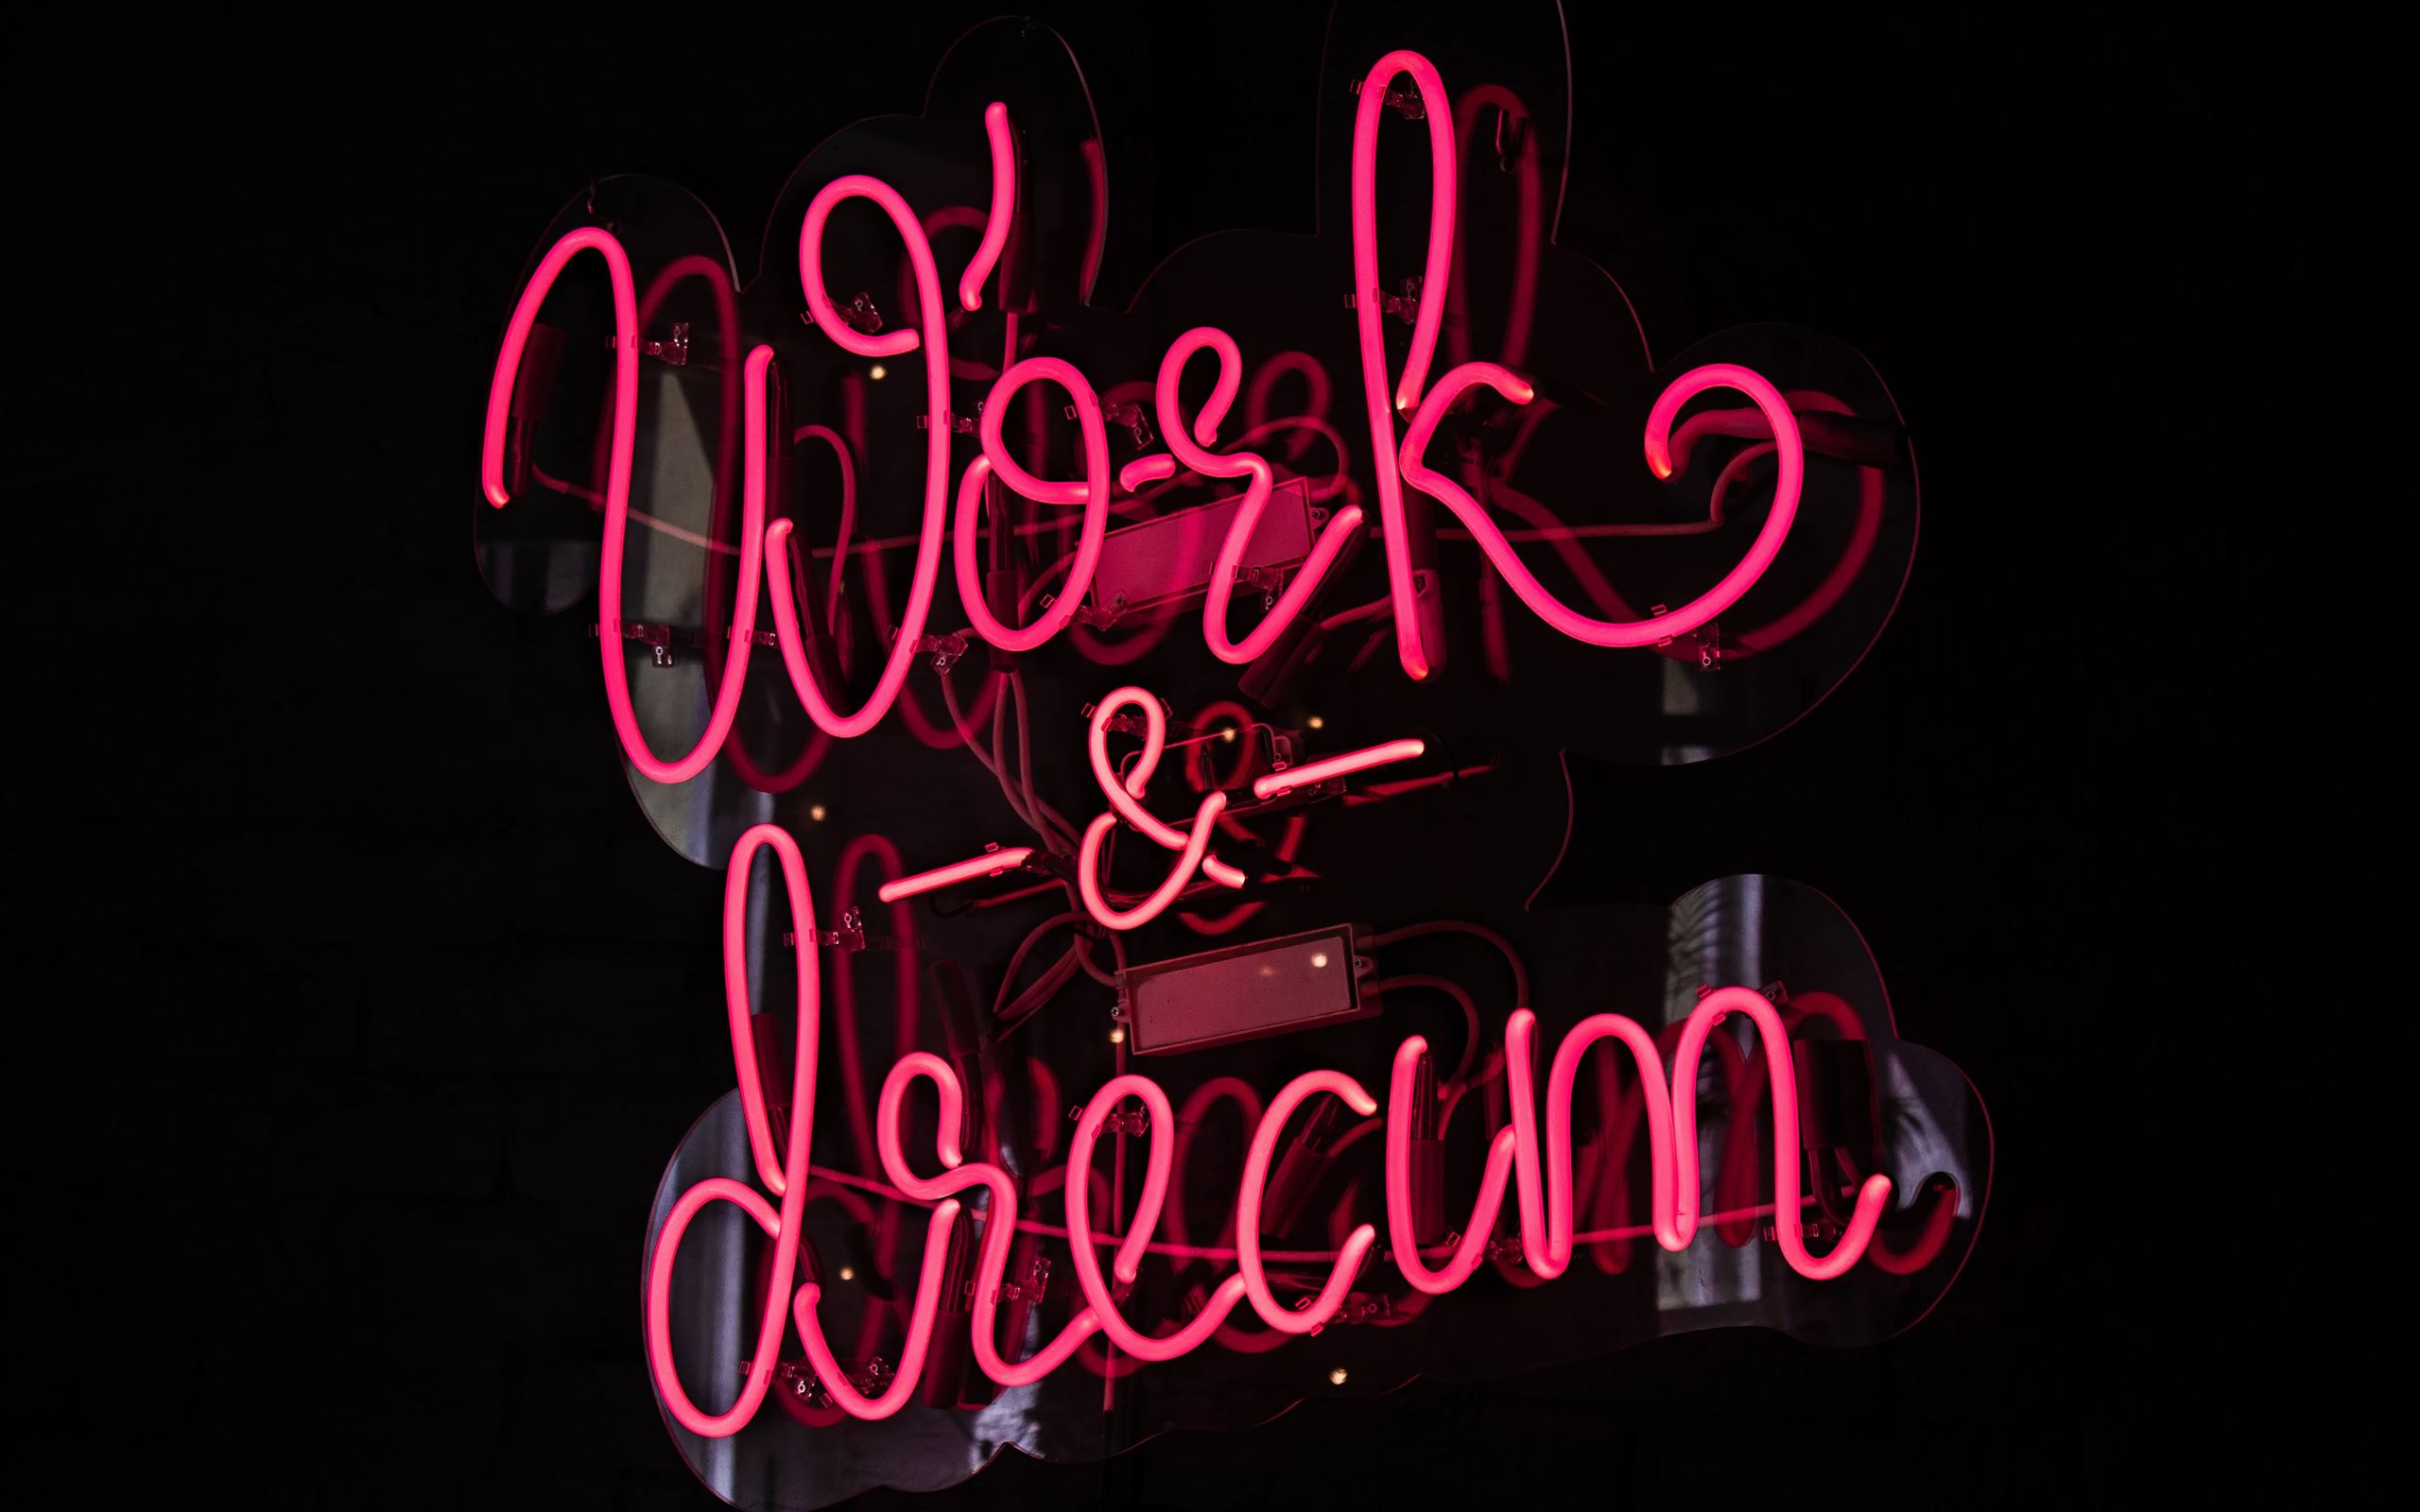 Works And Dream Led Signage Macbook Pro Wallpaper